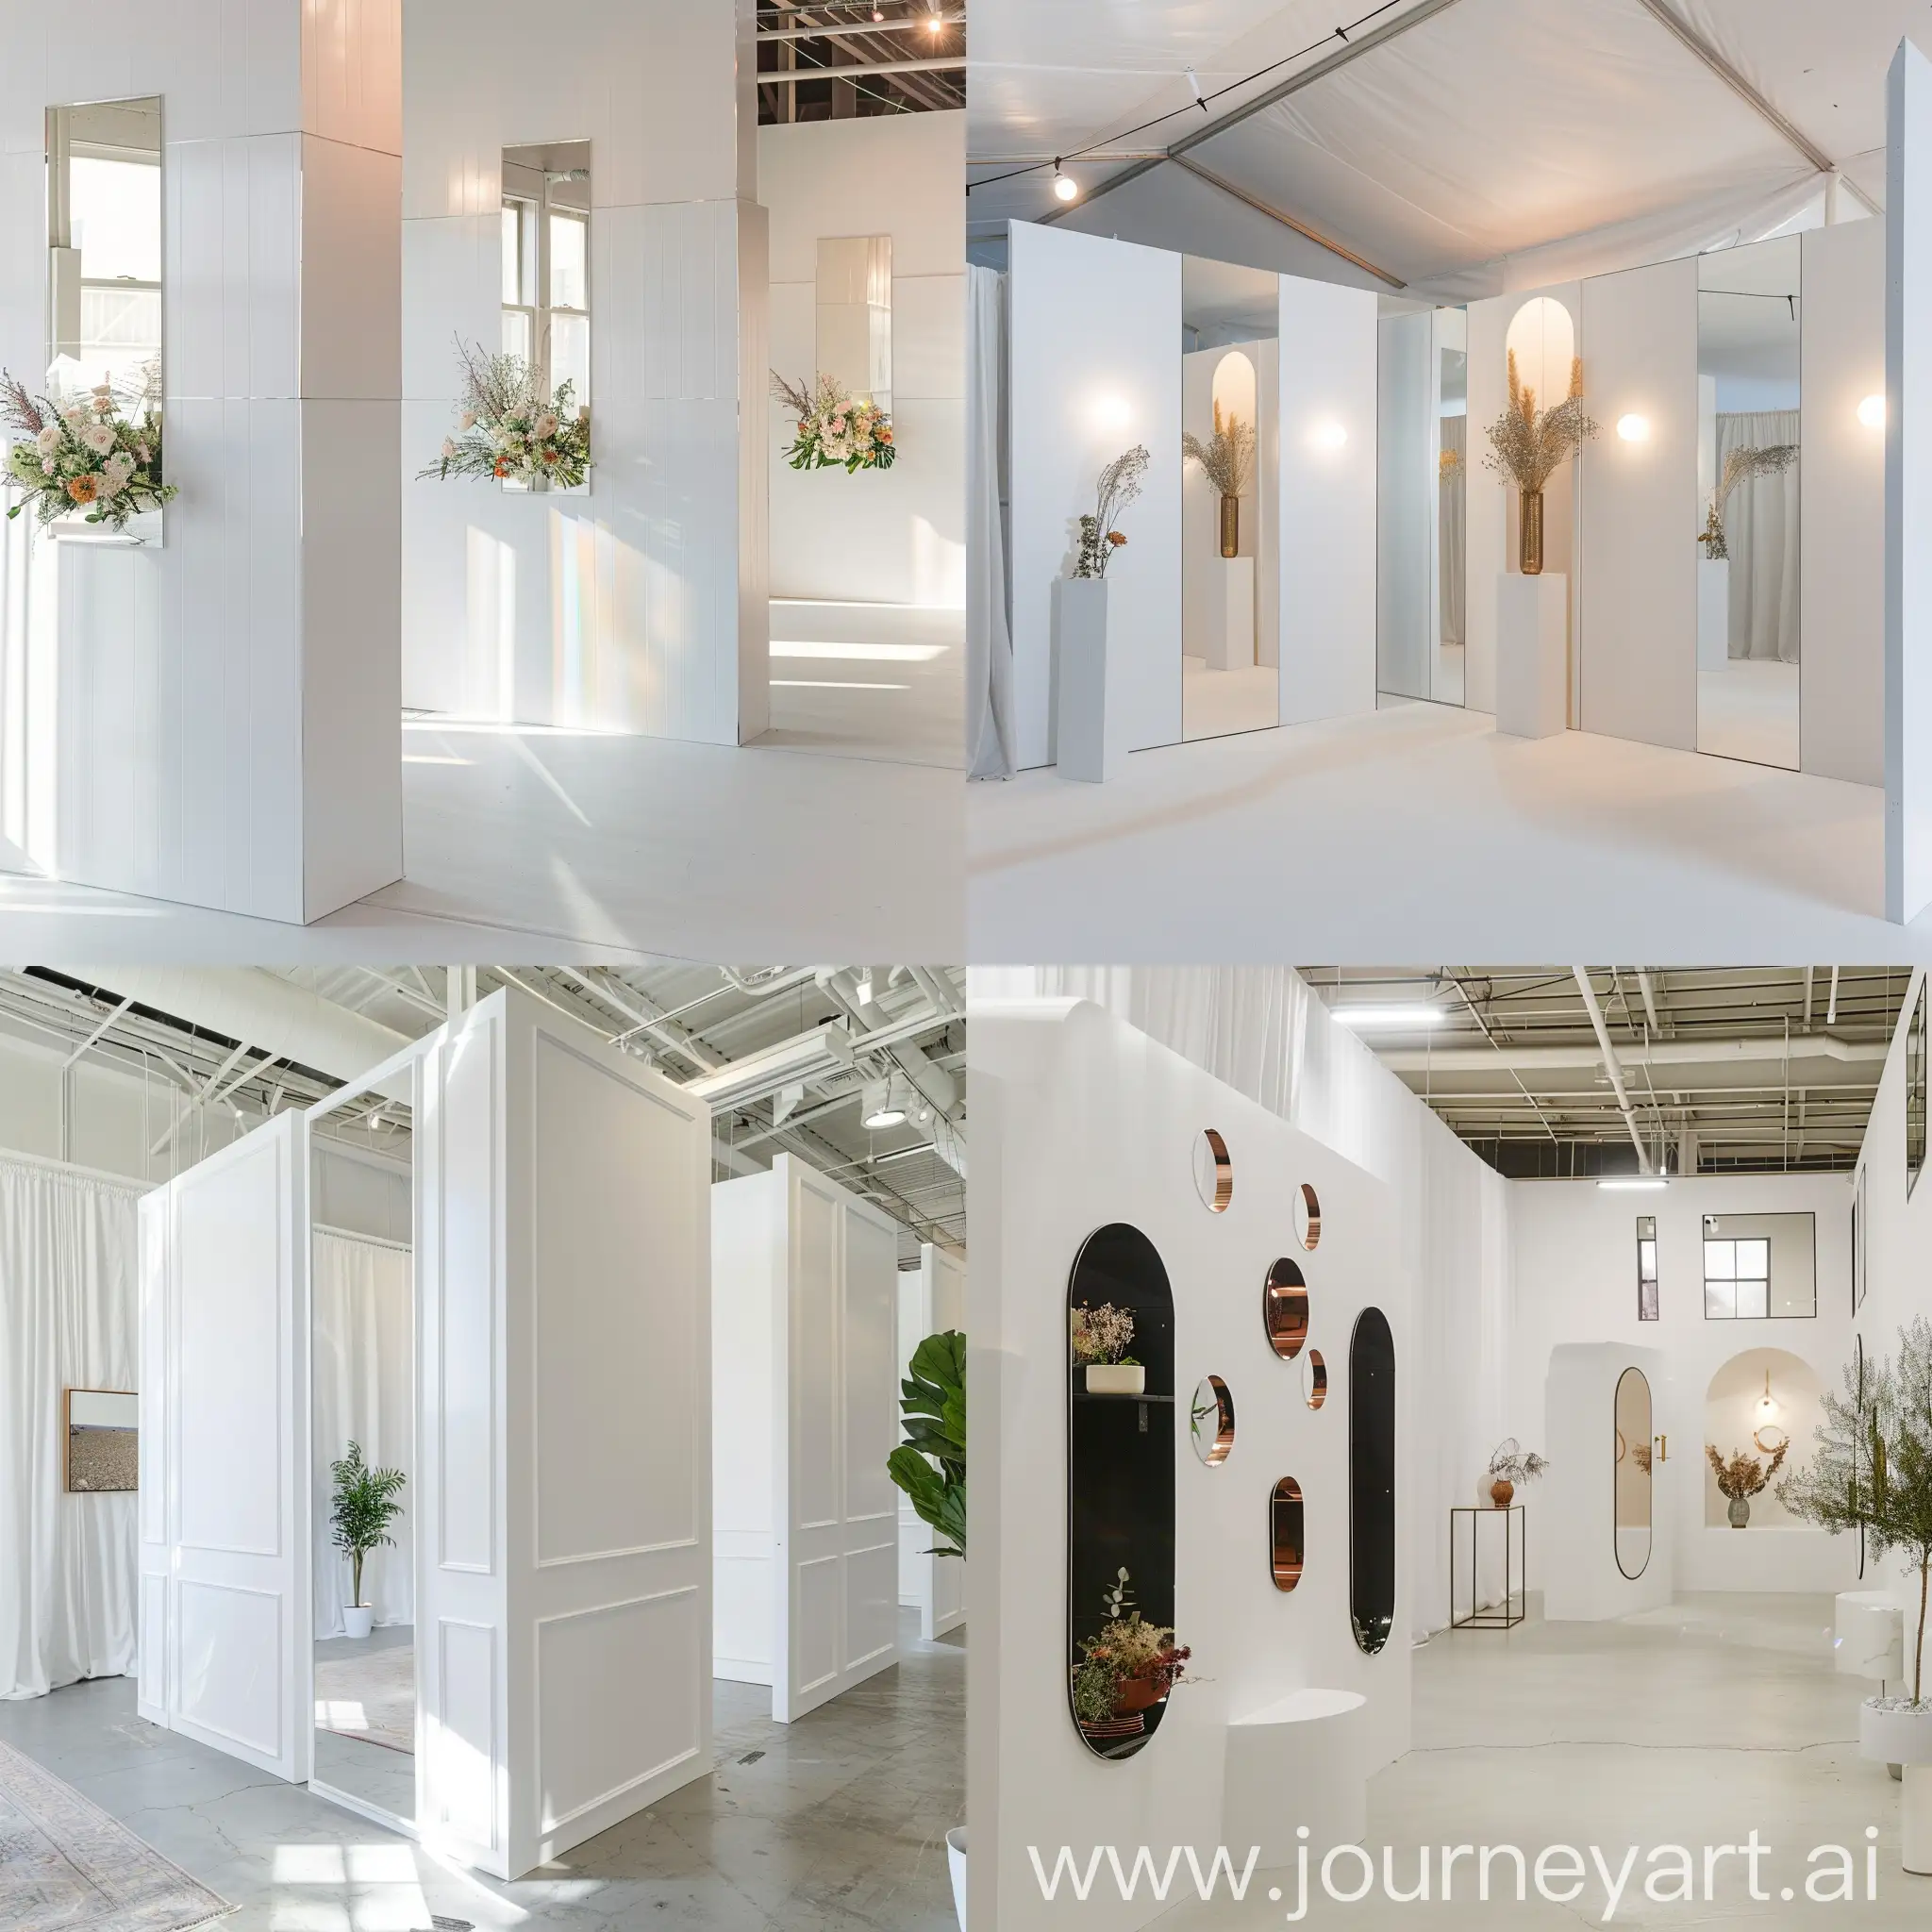 Chic-PopUp-Event-Space-with-Mirrored-Accents-for-a-Bright-Atmosphere